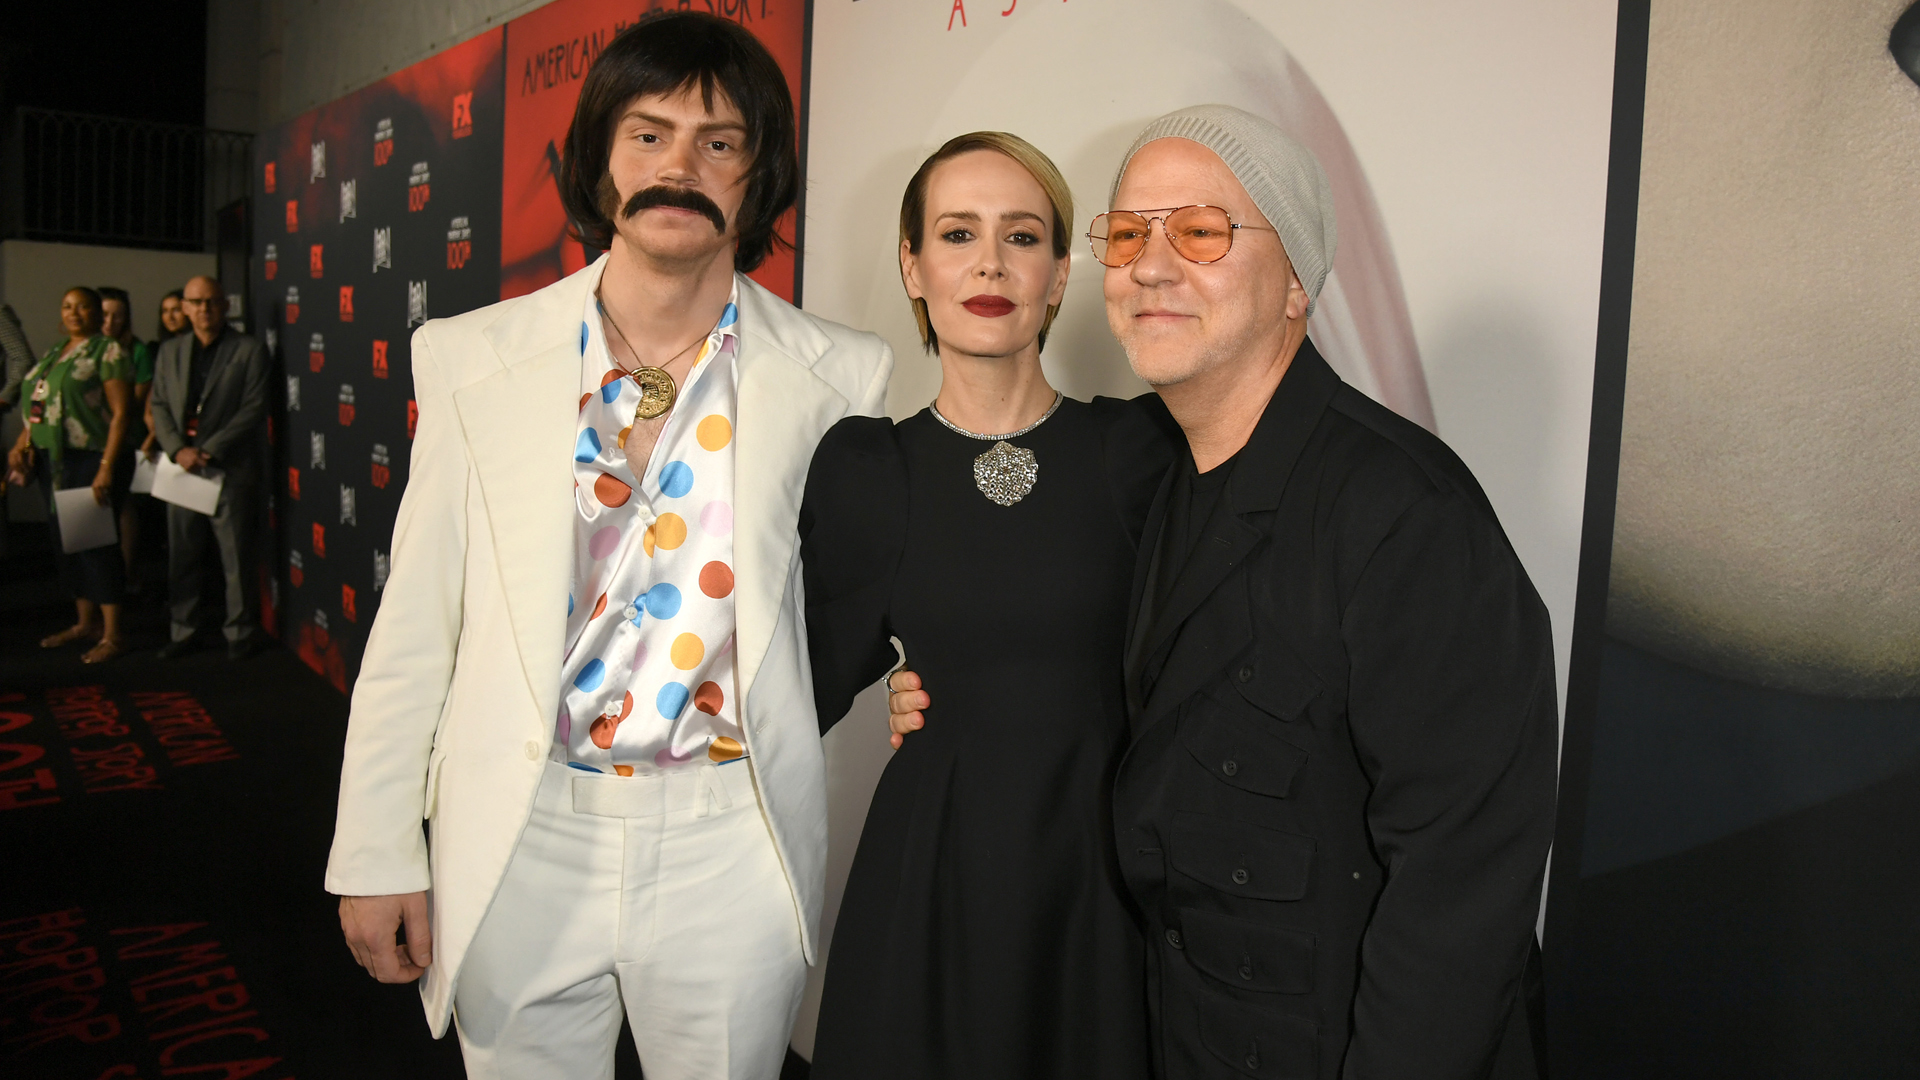 Evan Peters, Sarah Paulson, and Ryan Murphy attend FX's "American Horror Story" 100th Episode Celebration at Hollywood Forever on October 26, 2019 in Hollywood, California. 